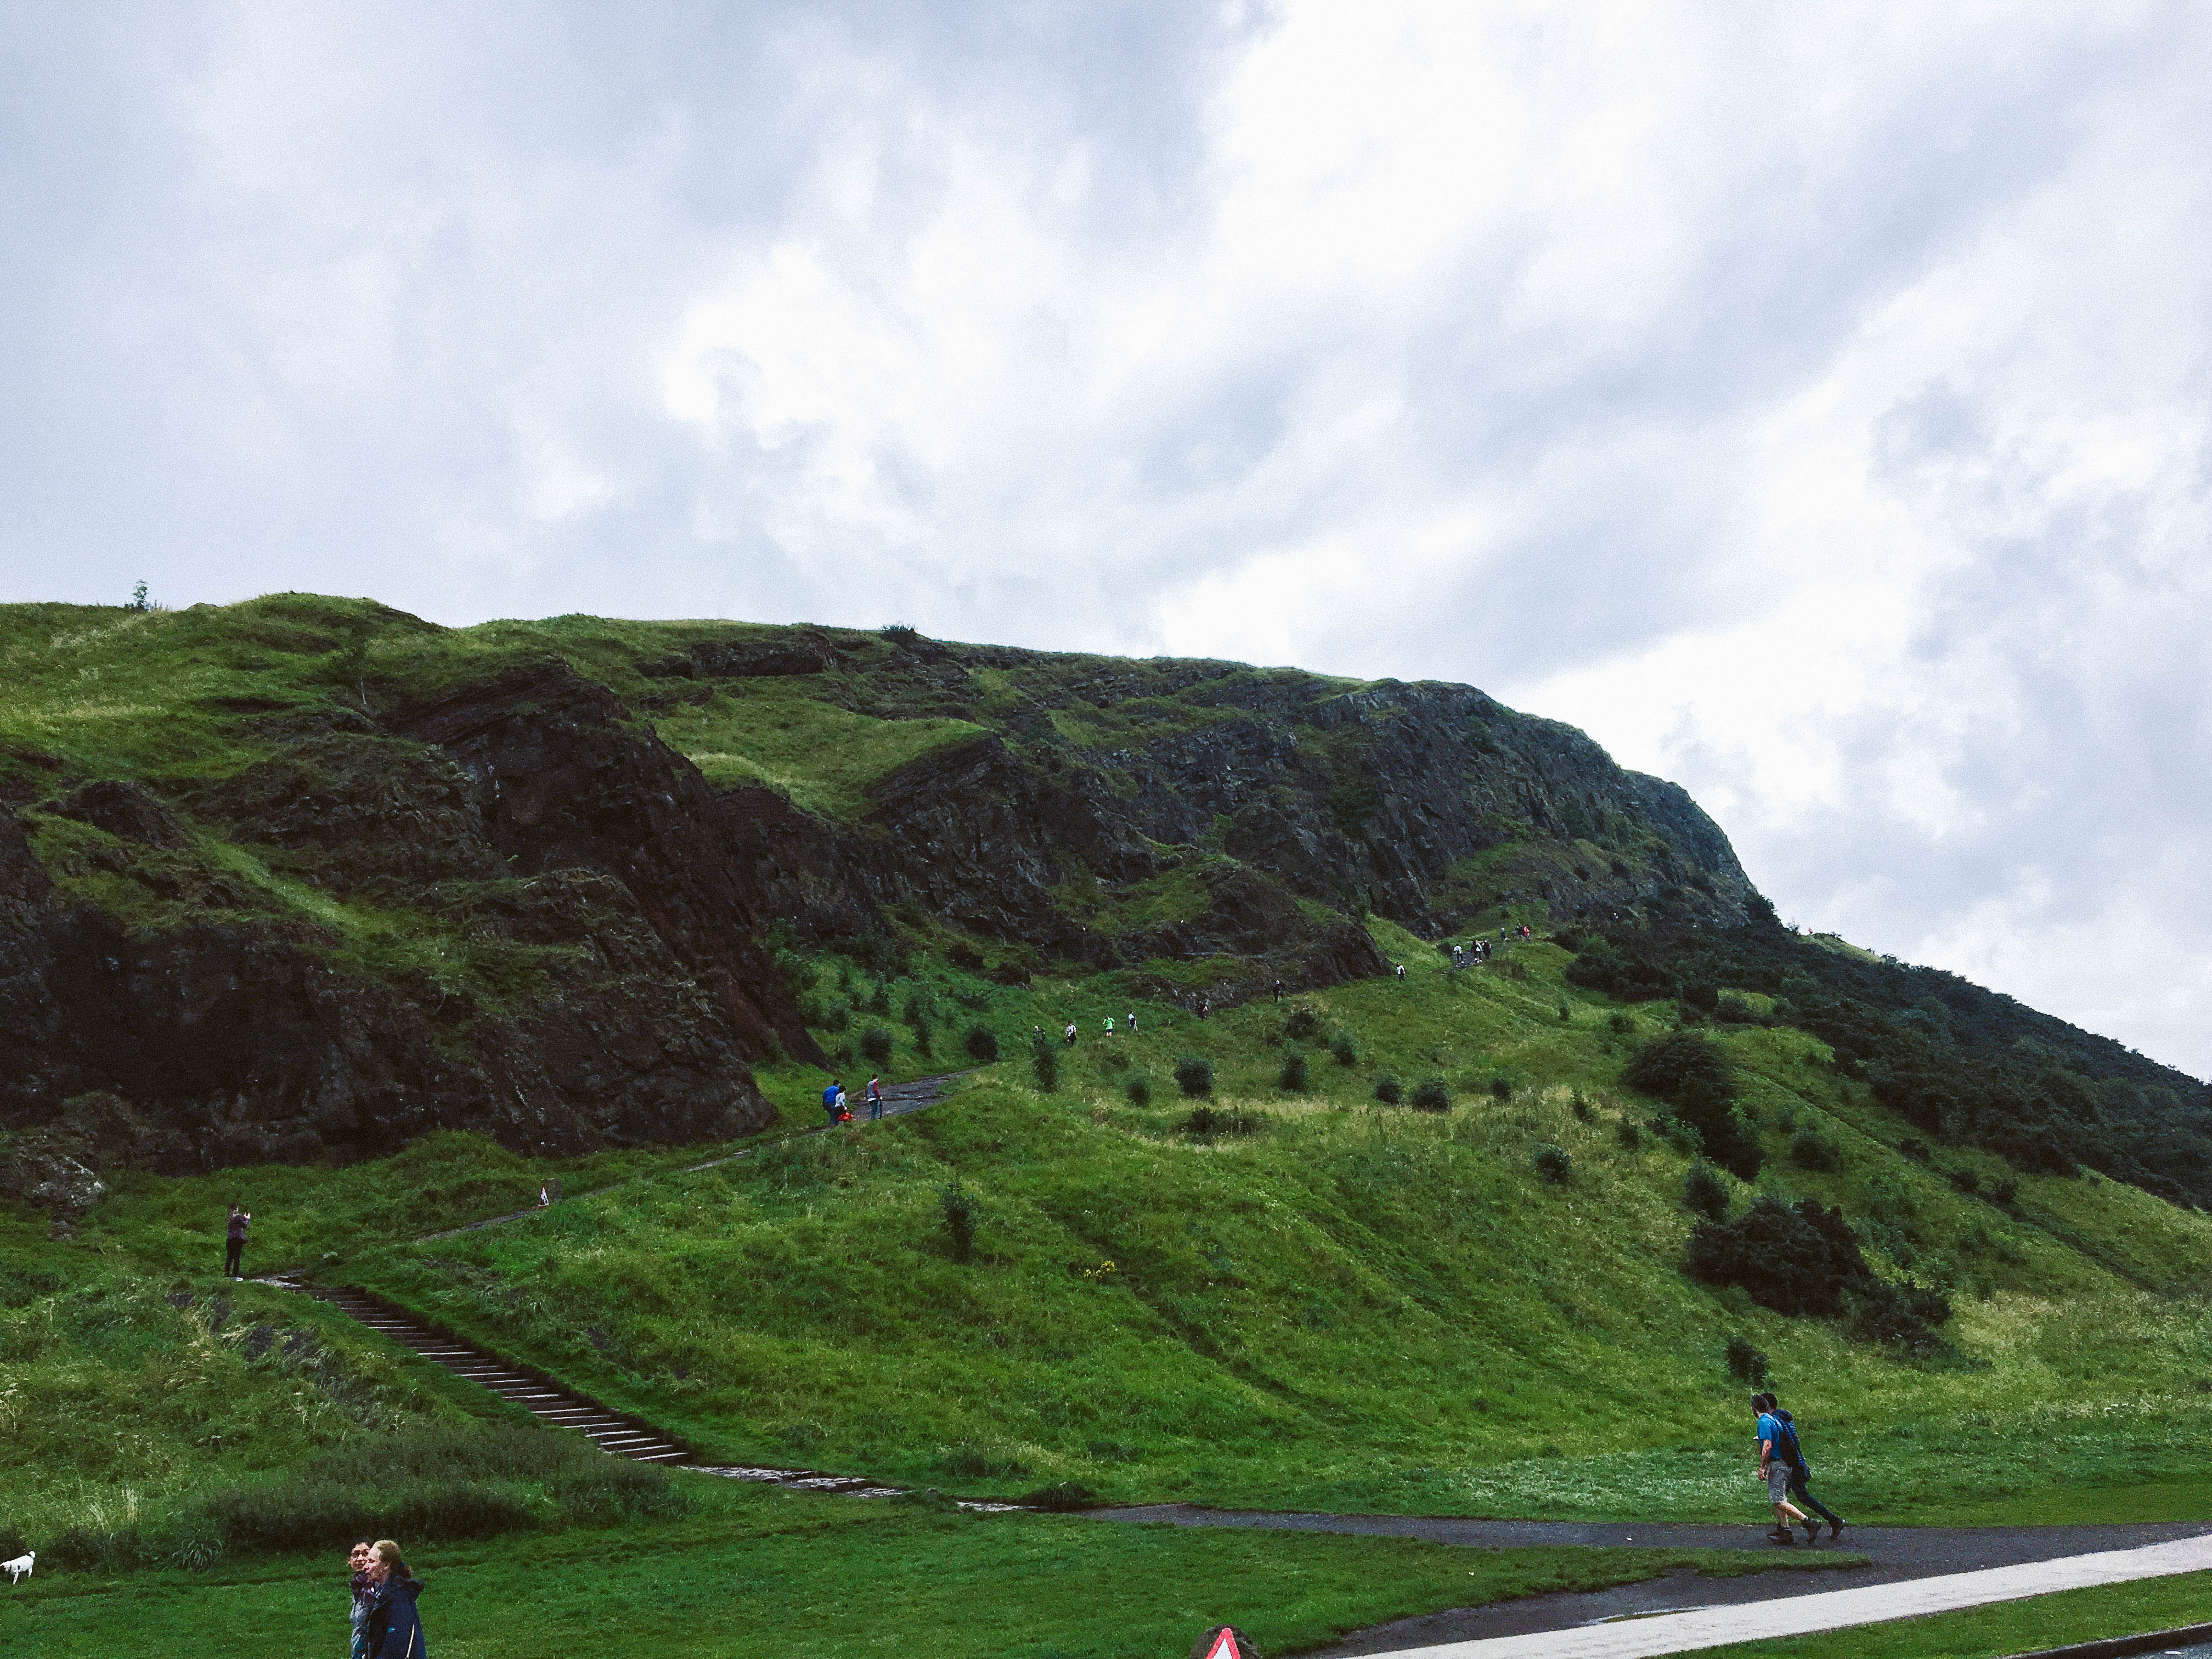 Hikes and Haggis: Working Up an Appetite in Edinburgh